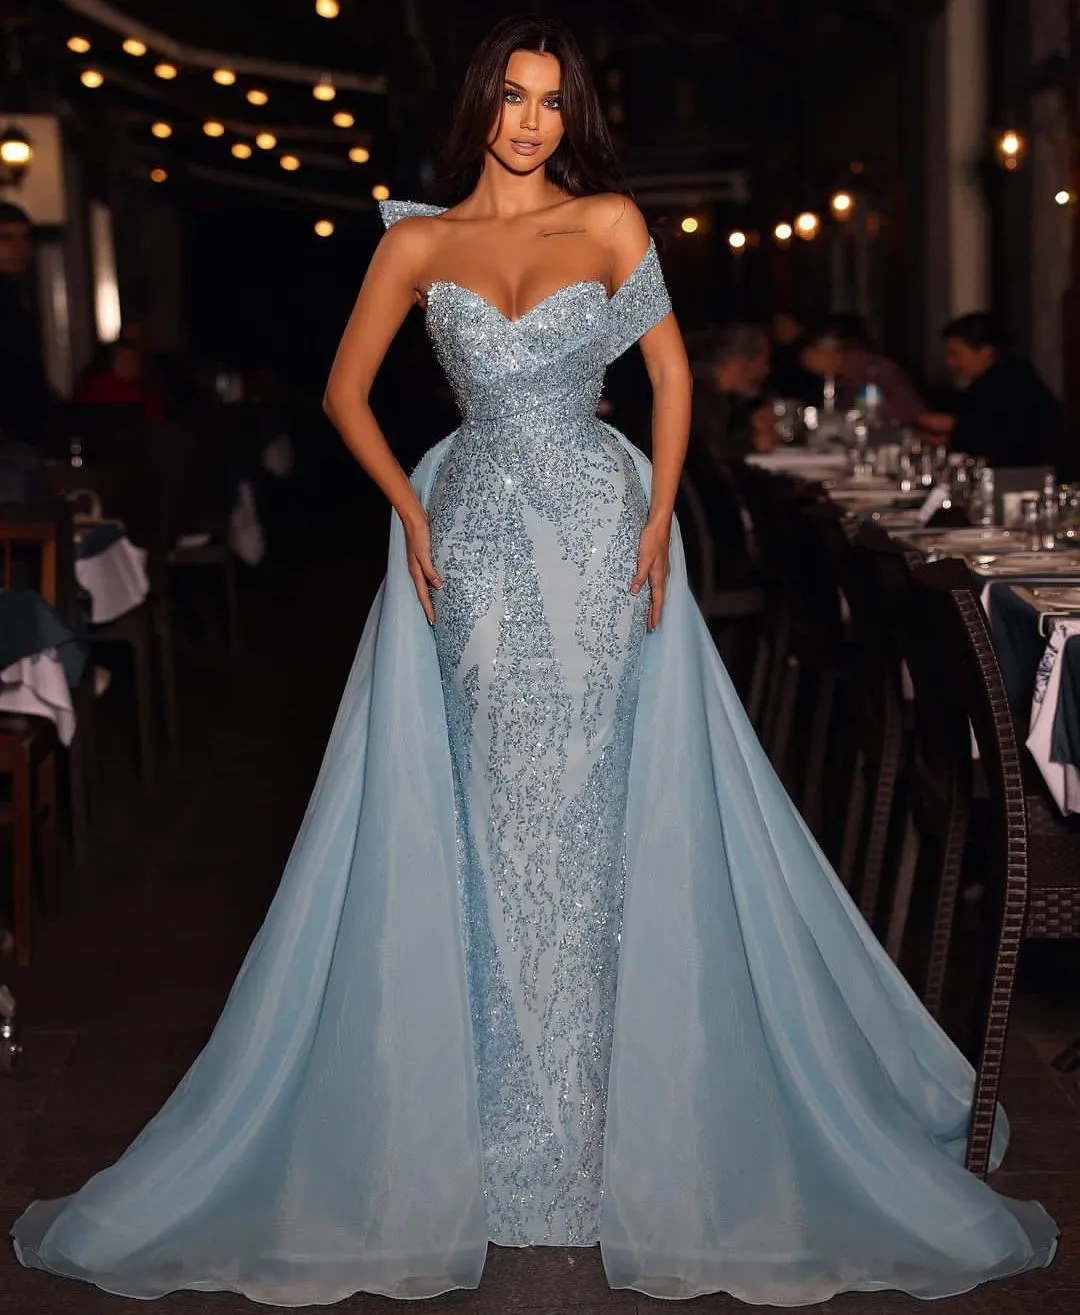 Mermaid Evening Blue Sleeveless V Neck Beaded 3D Lace Appliques Sequins Floor Length Celebrity Detachable Train Formal Prom Dresses Gowns Party Dress